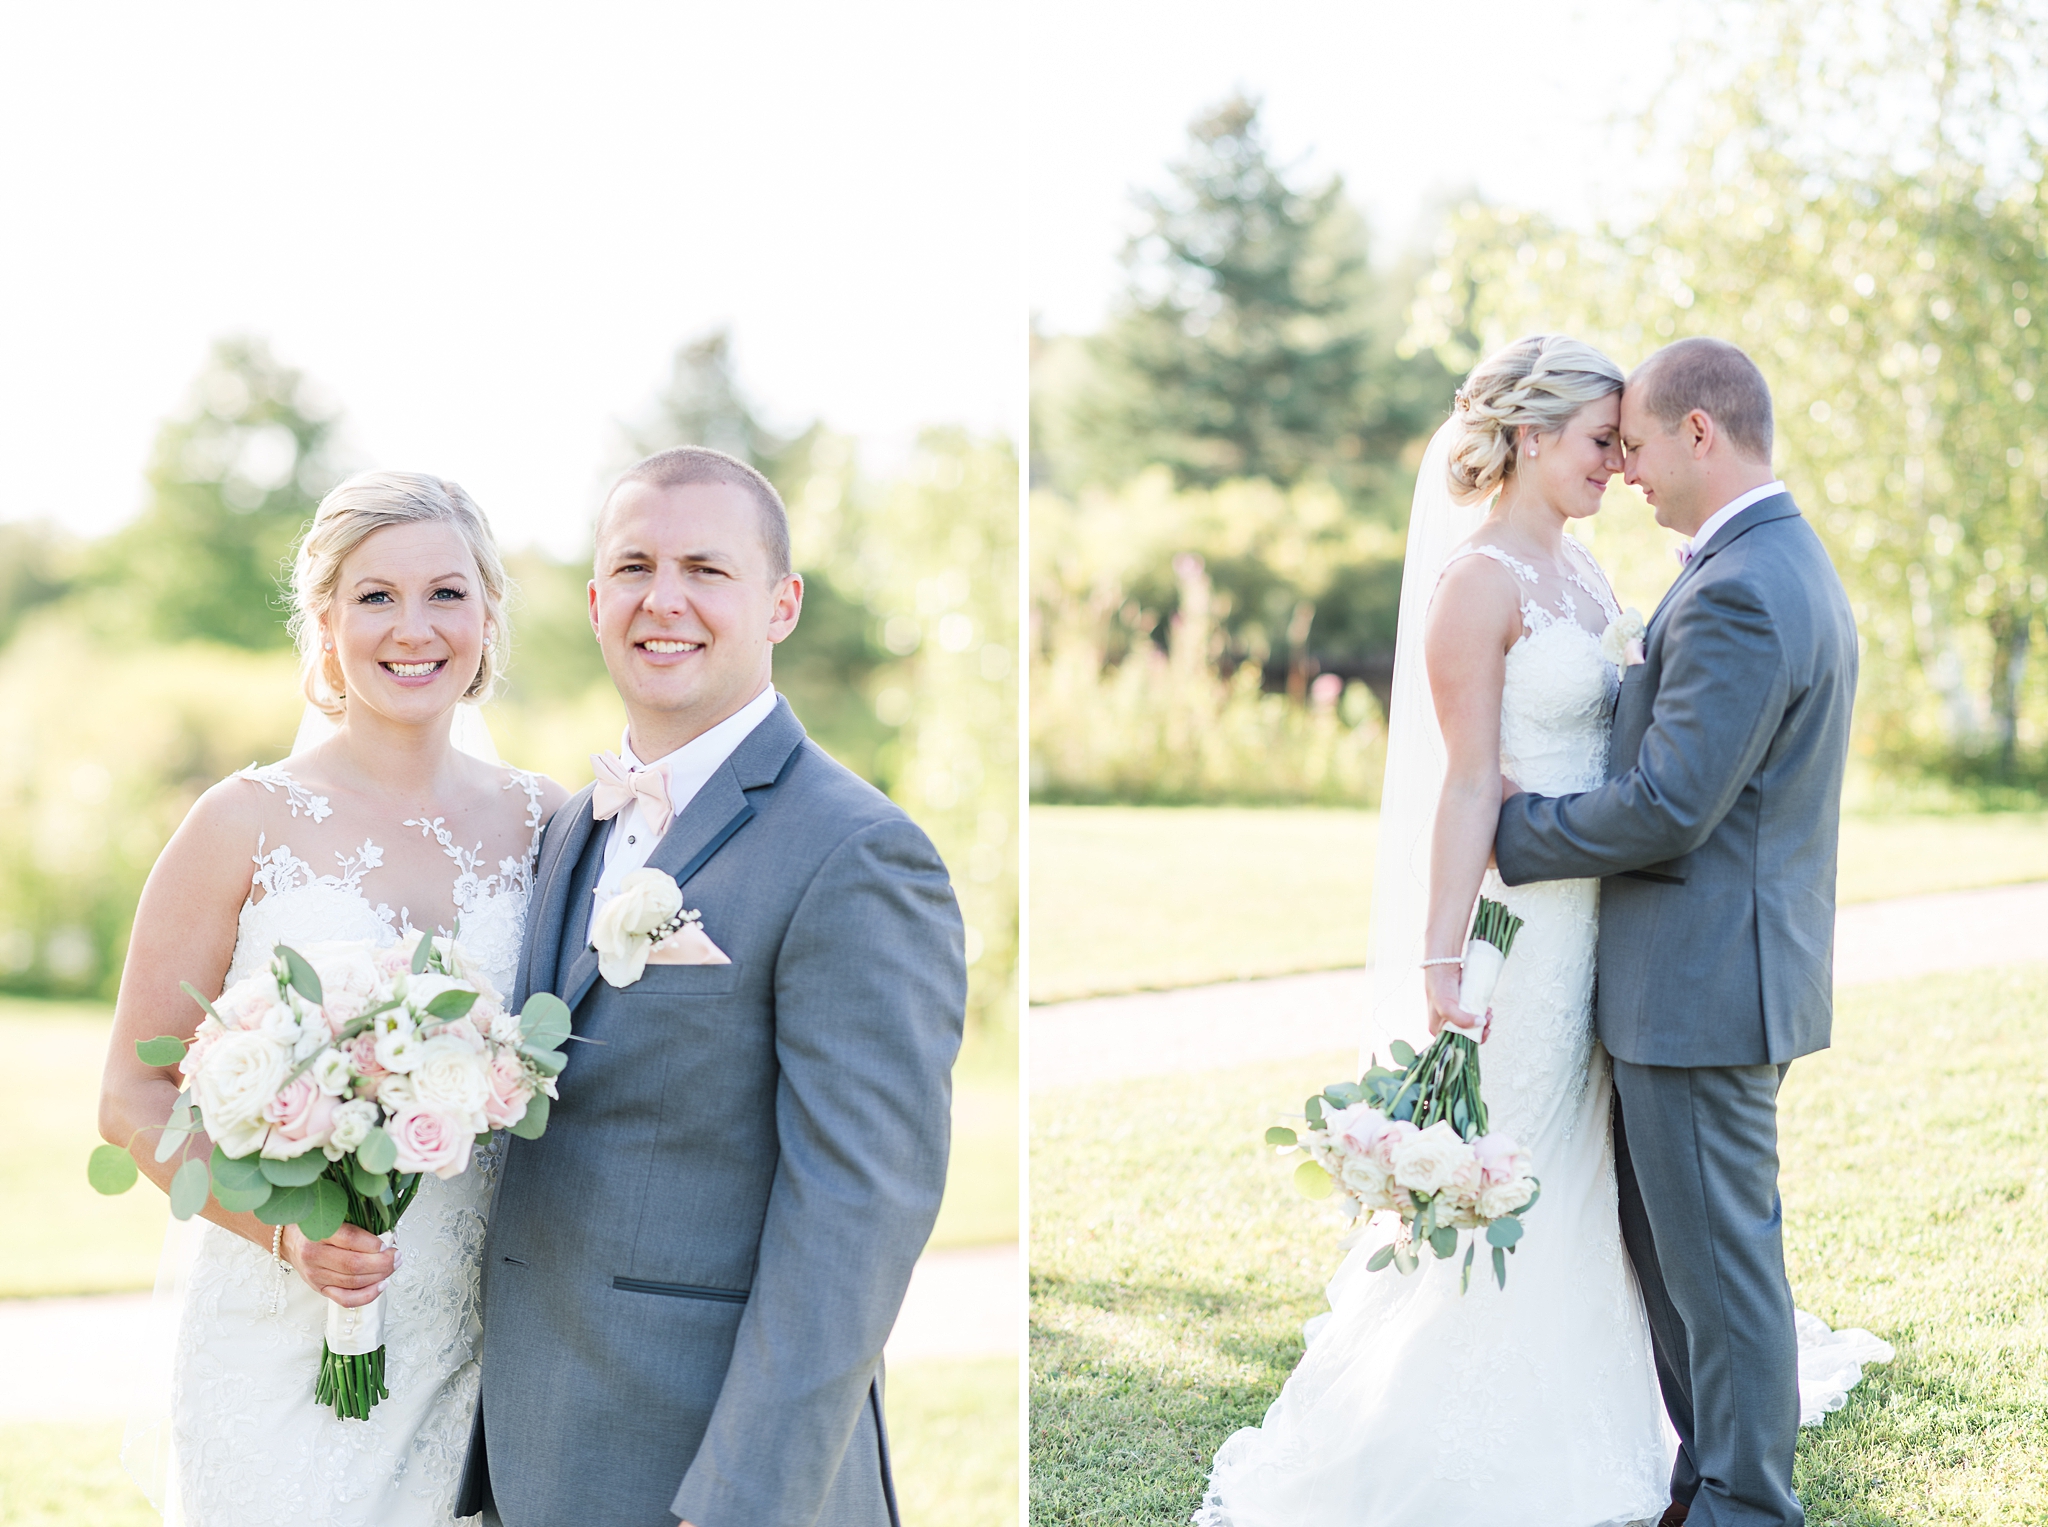 Legant blush & gold timeless wedding at orchardview wedding and conference centre | ottawa wedding get more inspiration from this fun summertime wedding. #ottawawedding #weddingphotography #ottawaweddings